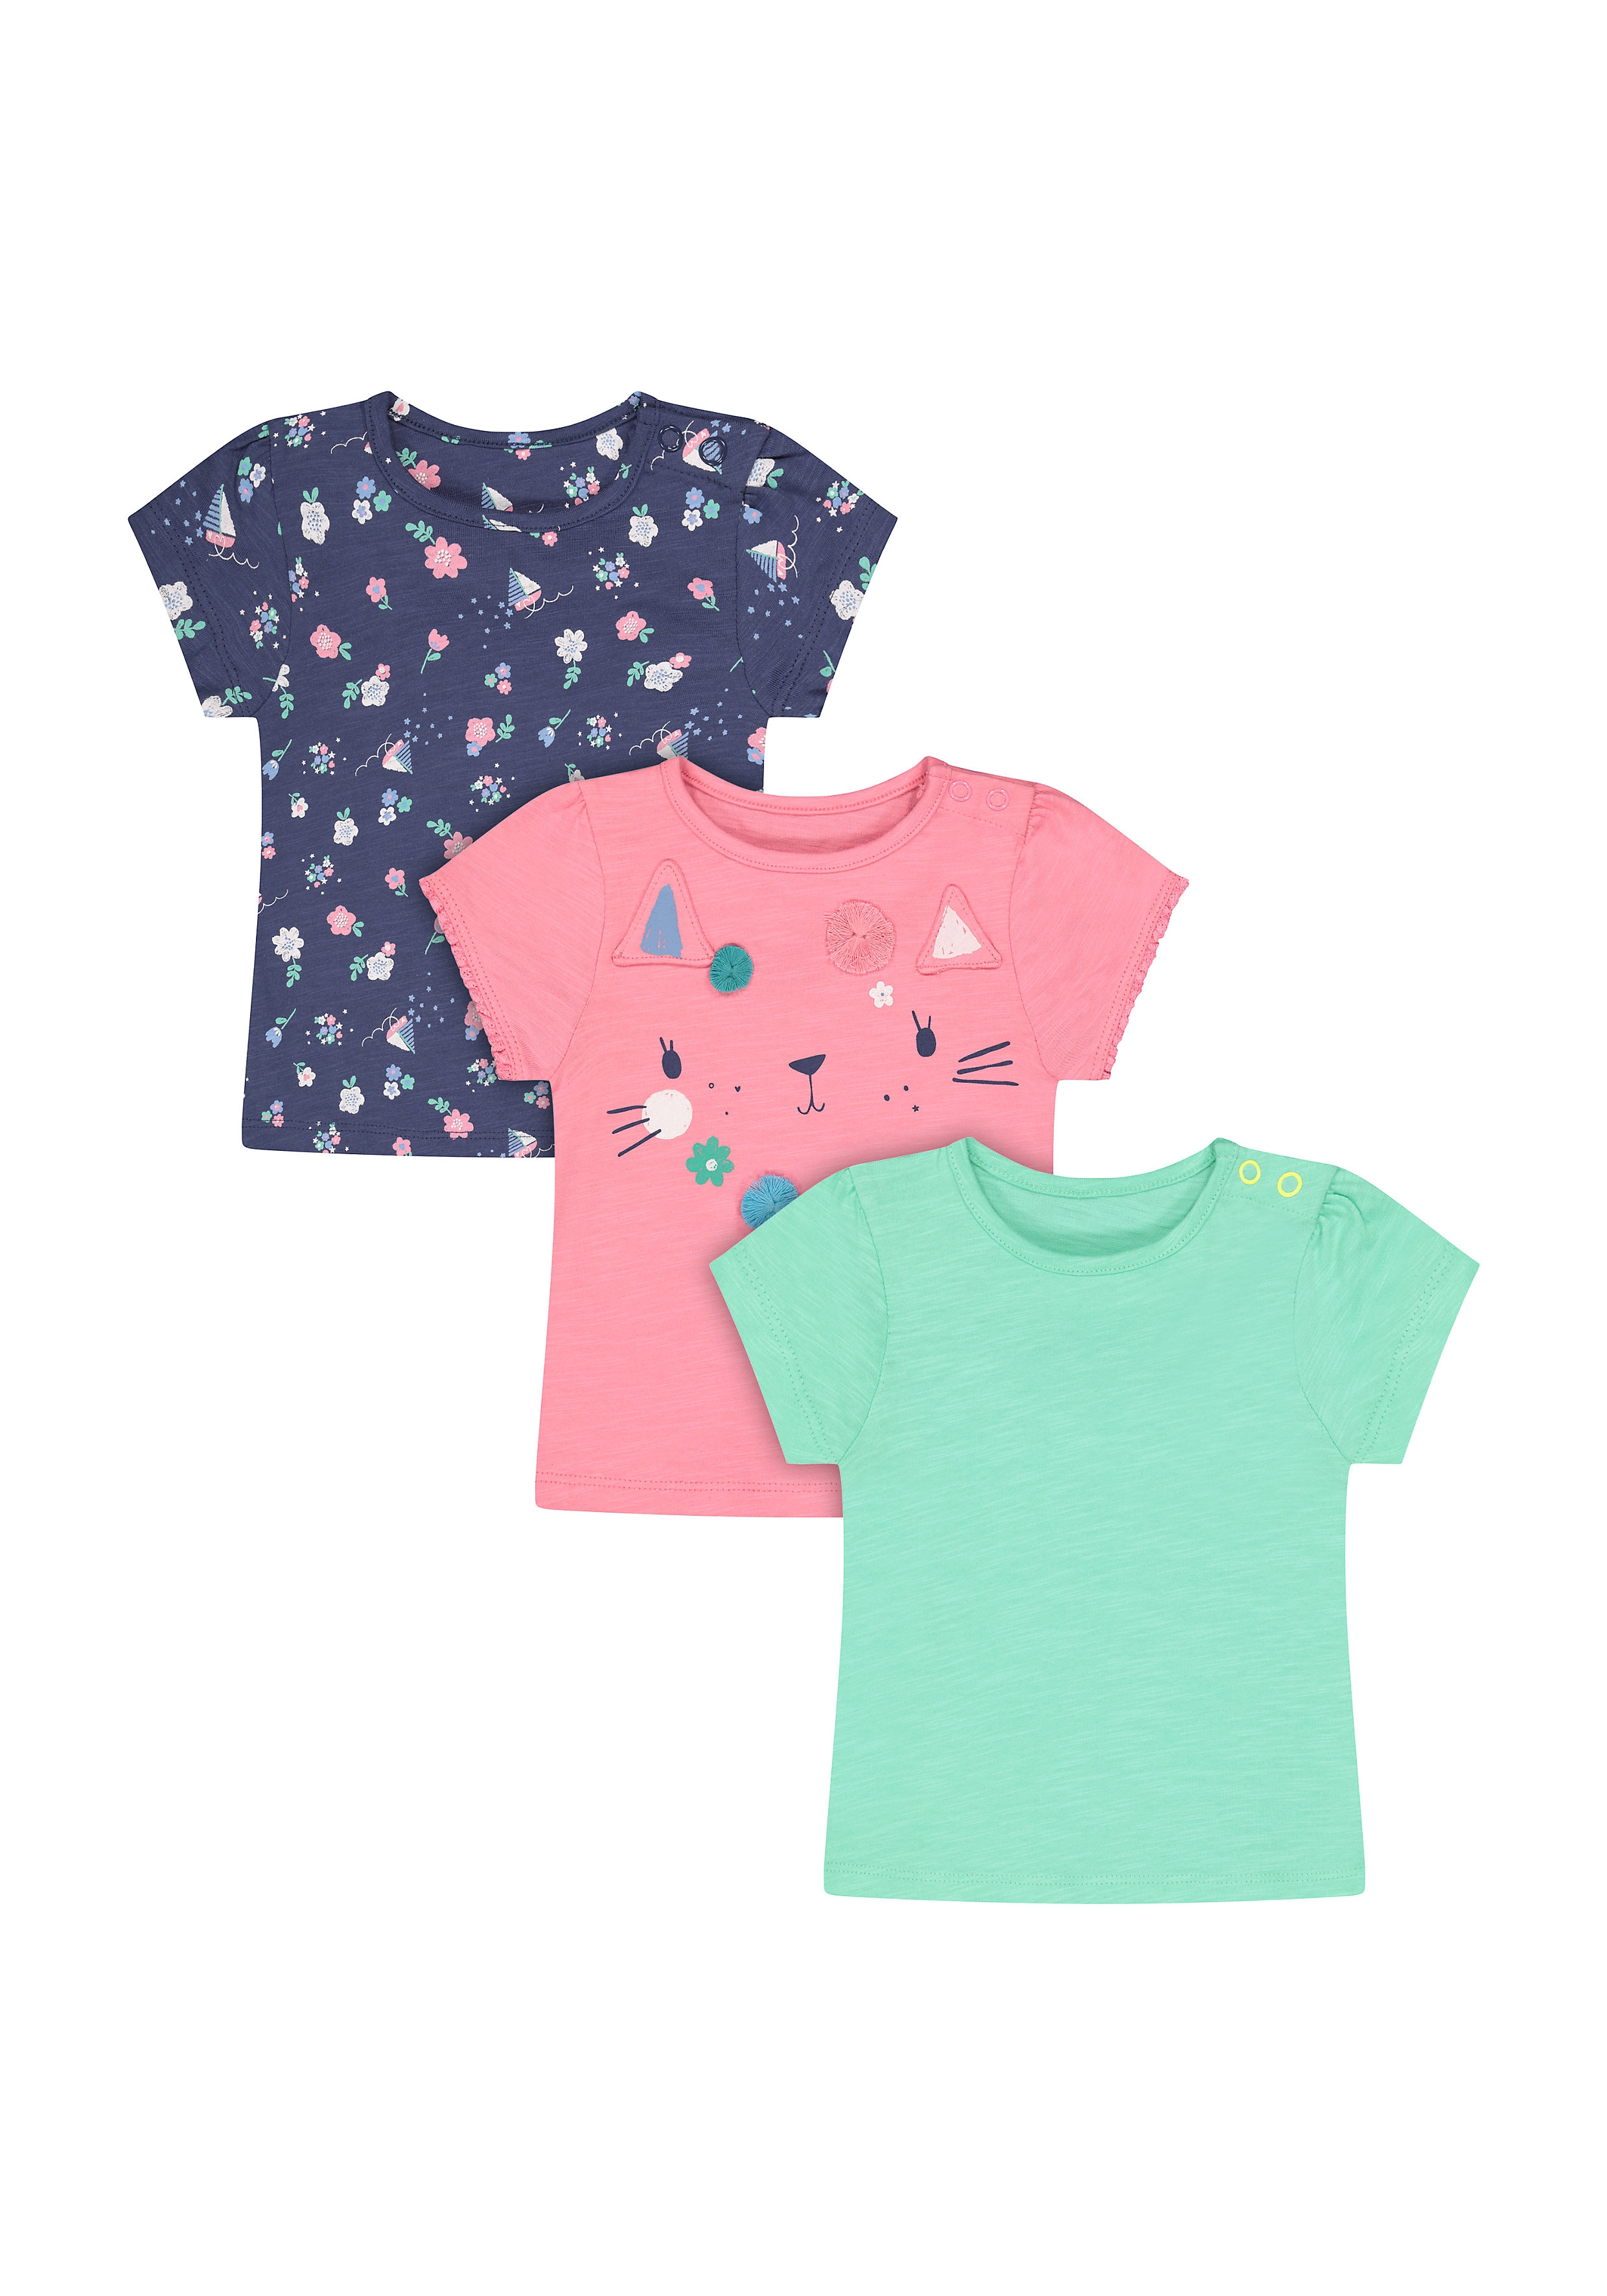 Mothercare | Girls Half Sleeves Round Neck T-shirts  - Pack Of 3 - Multicolor